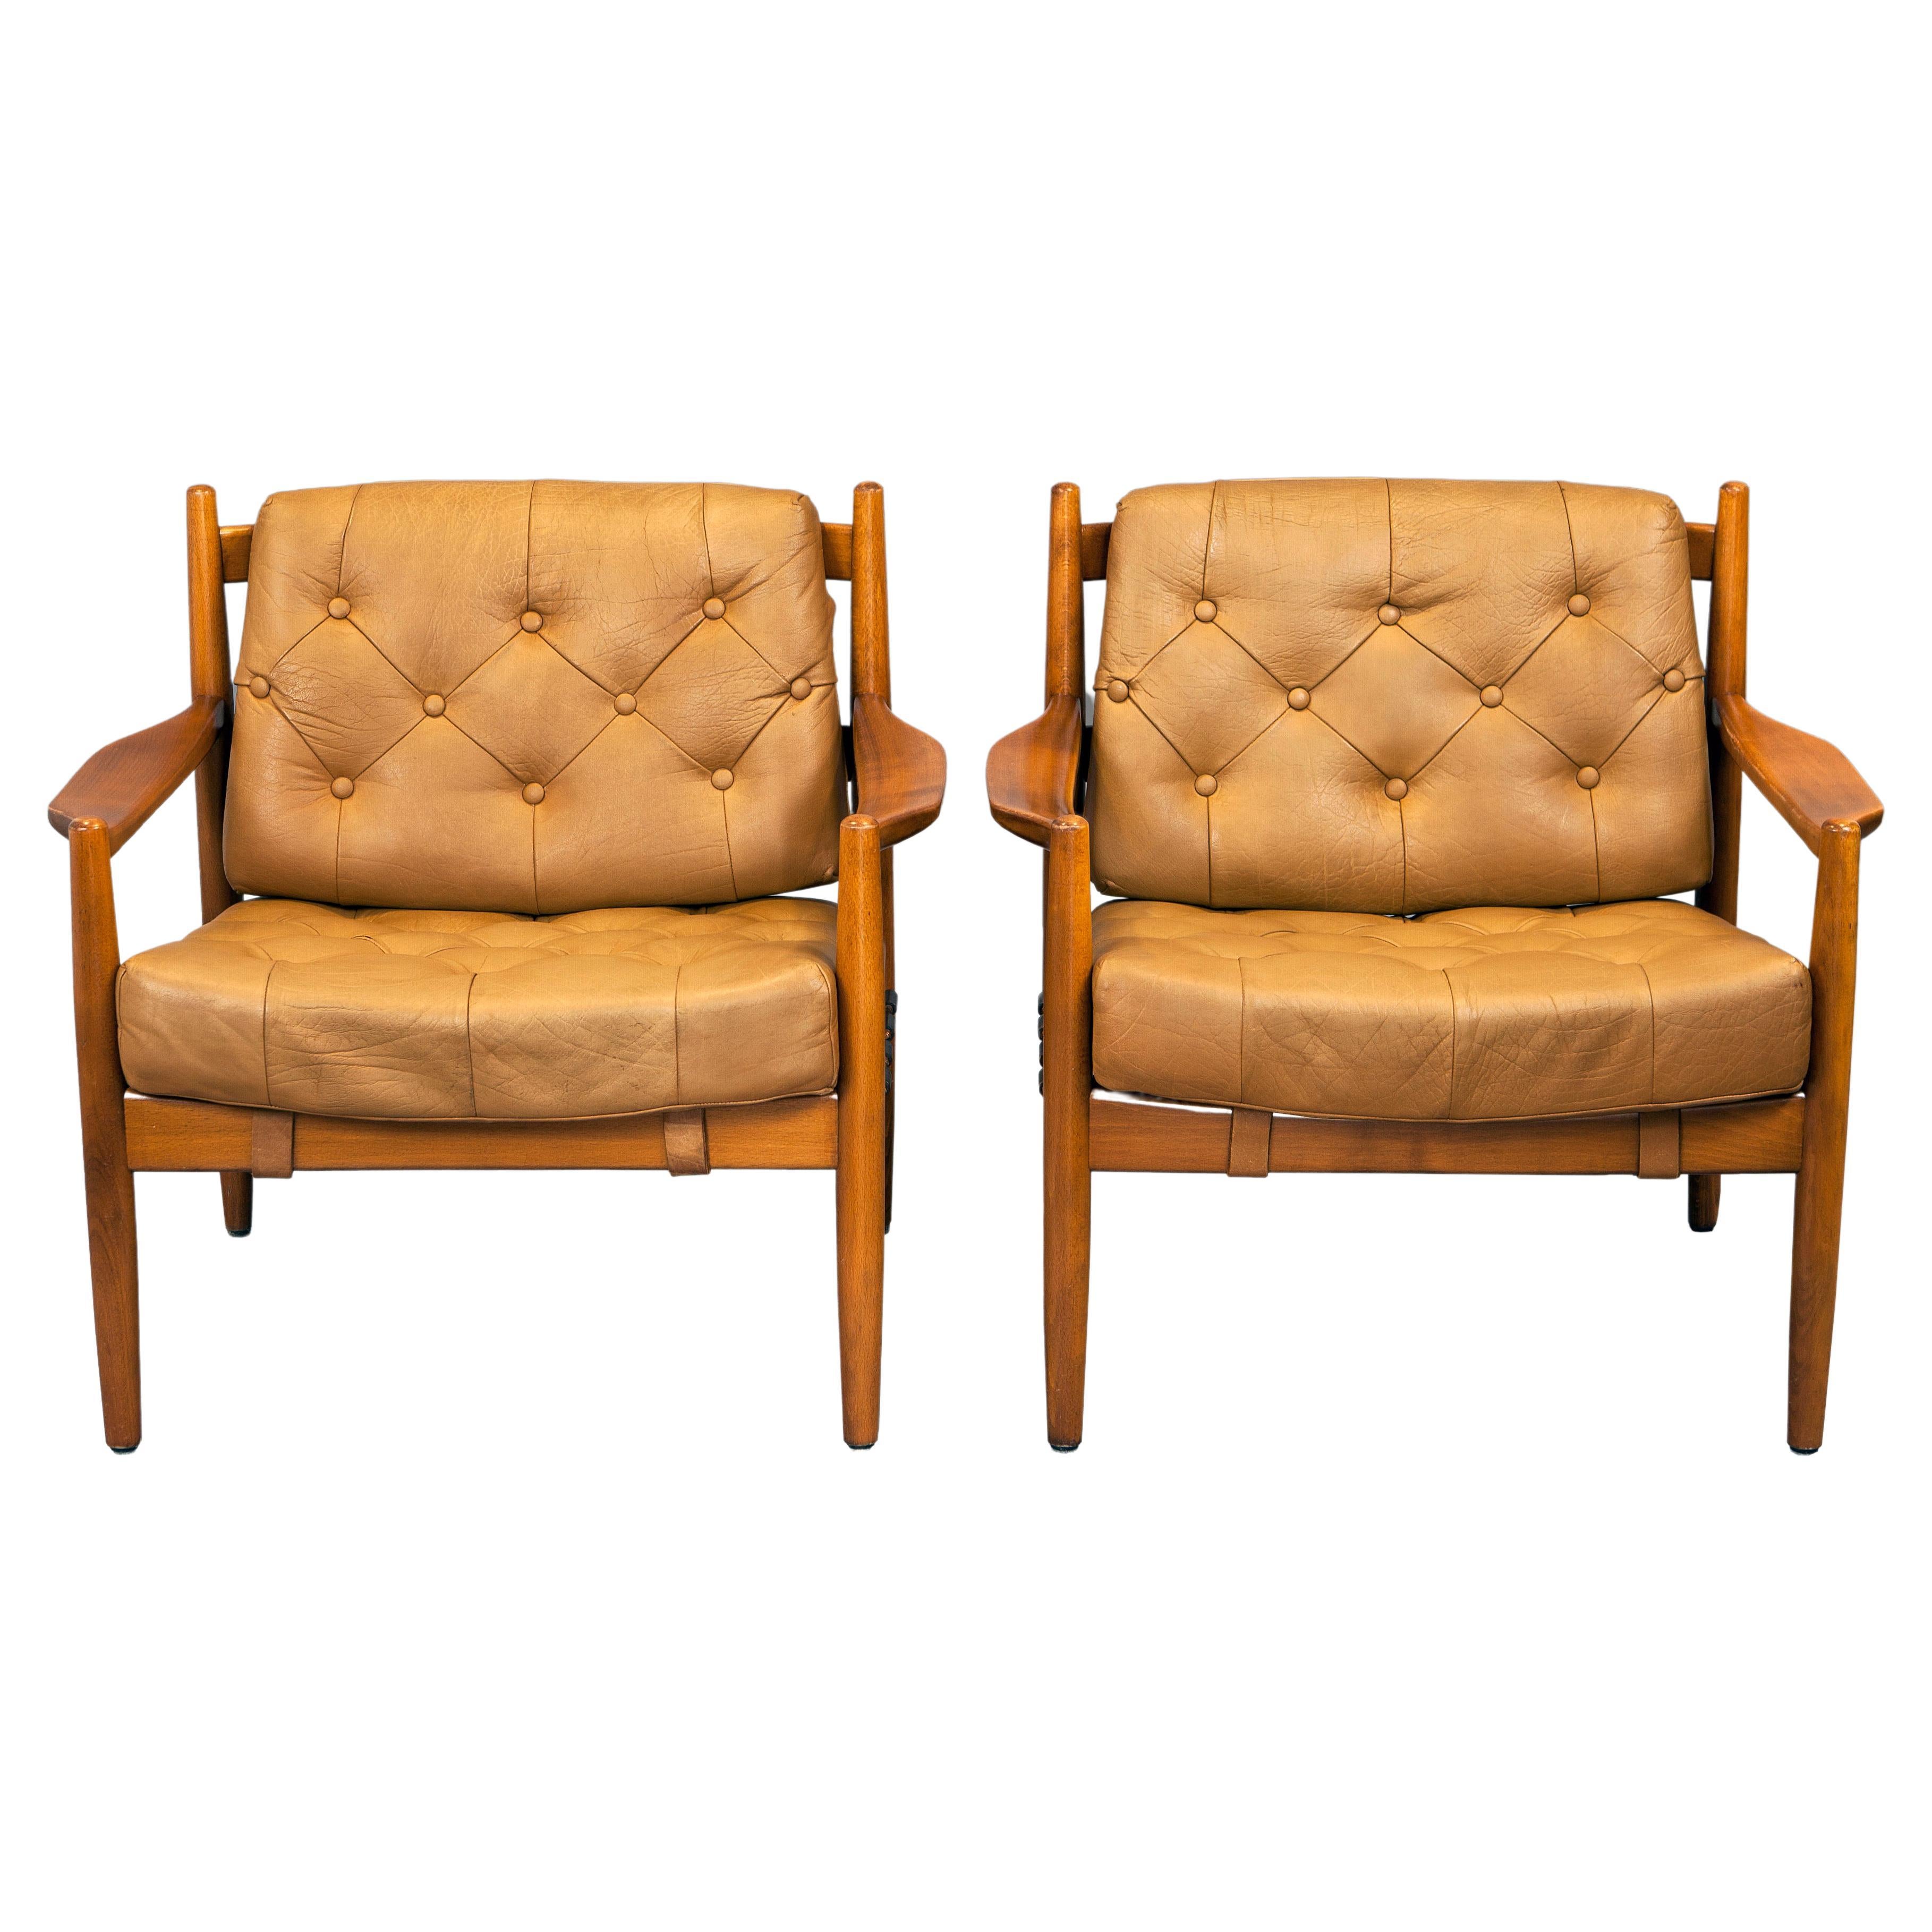 1960s Ingemar Thillmark “Läckö” Pair of Armchairs in Stained Beech and Leather